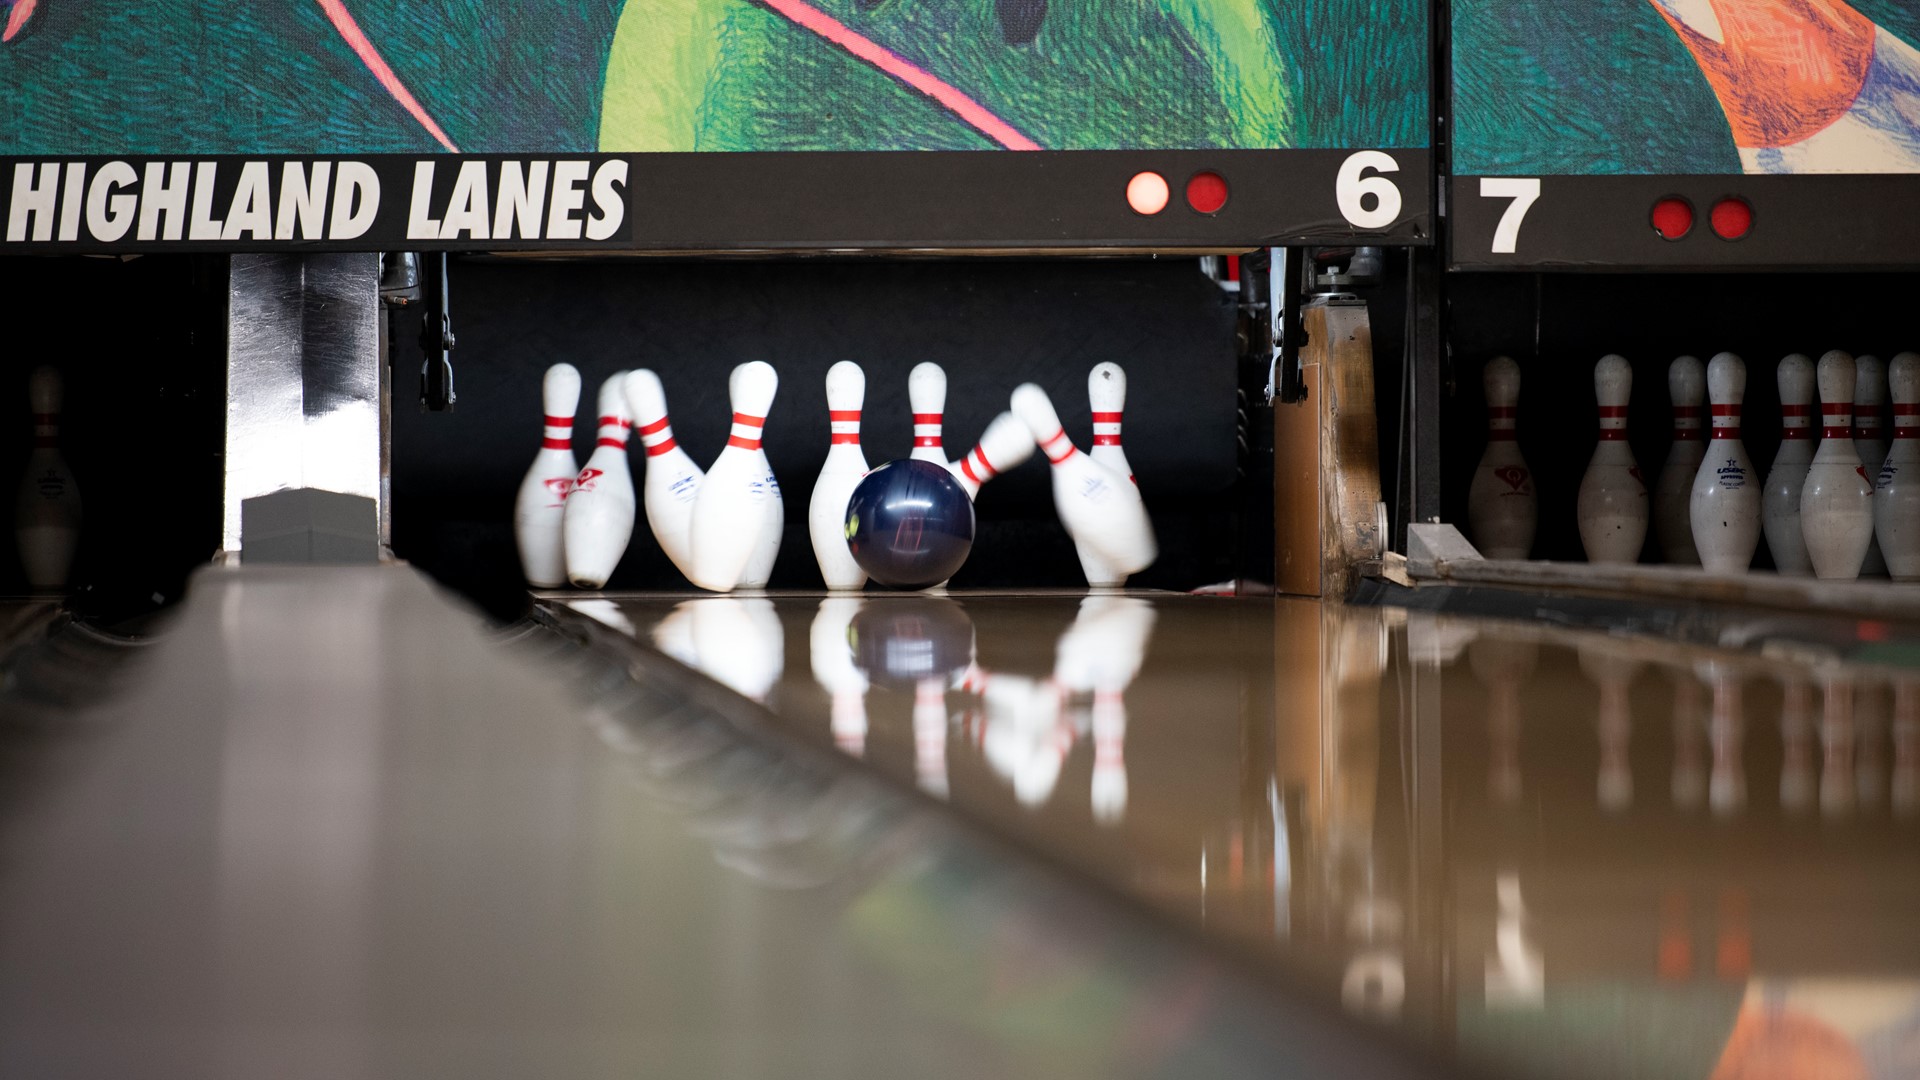 The Austin bowling alley plans to close its doors after almost 50 years in business.